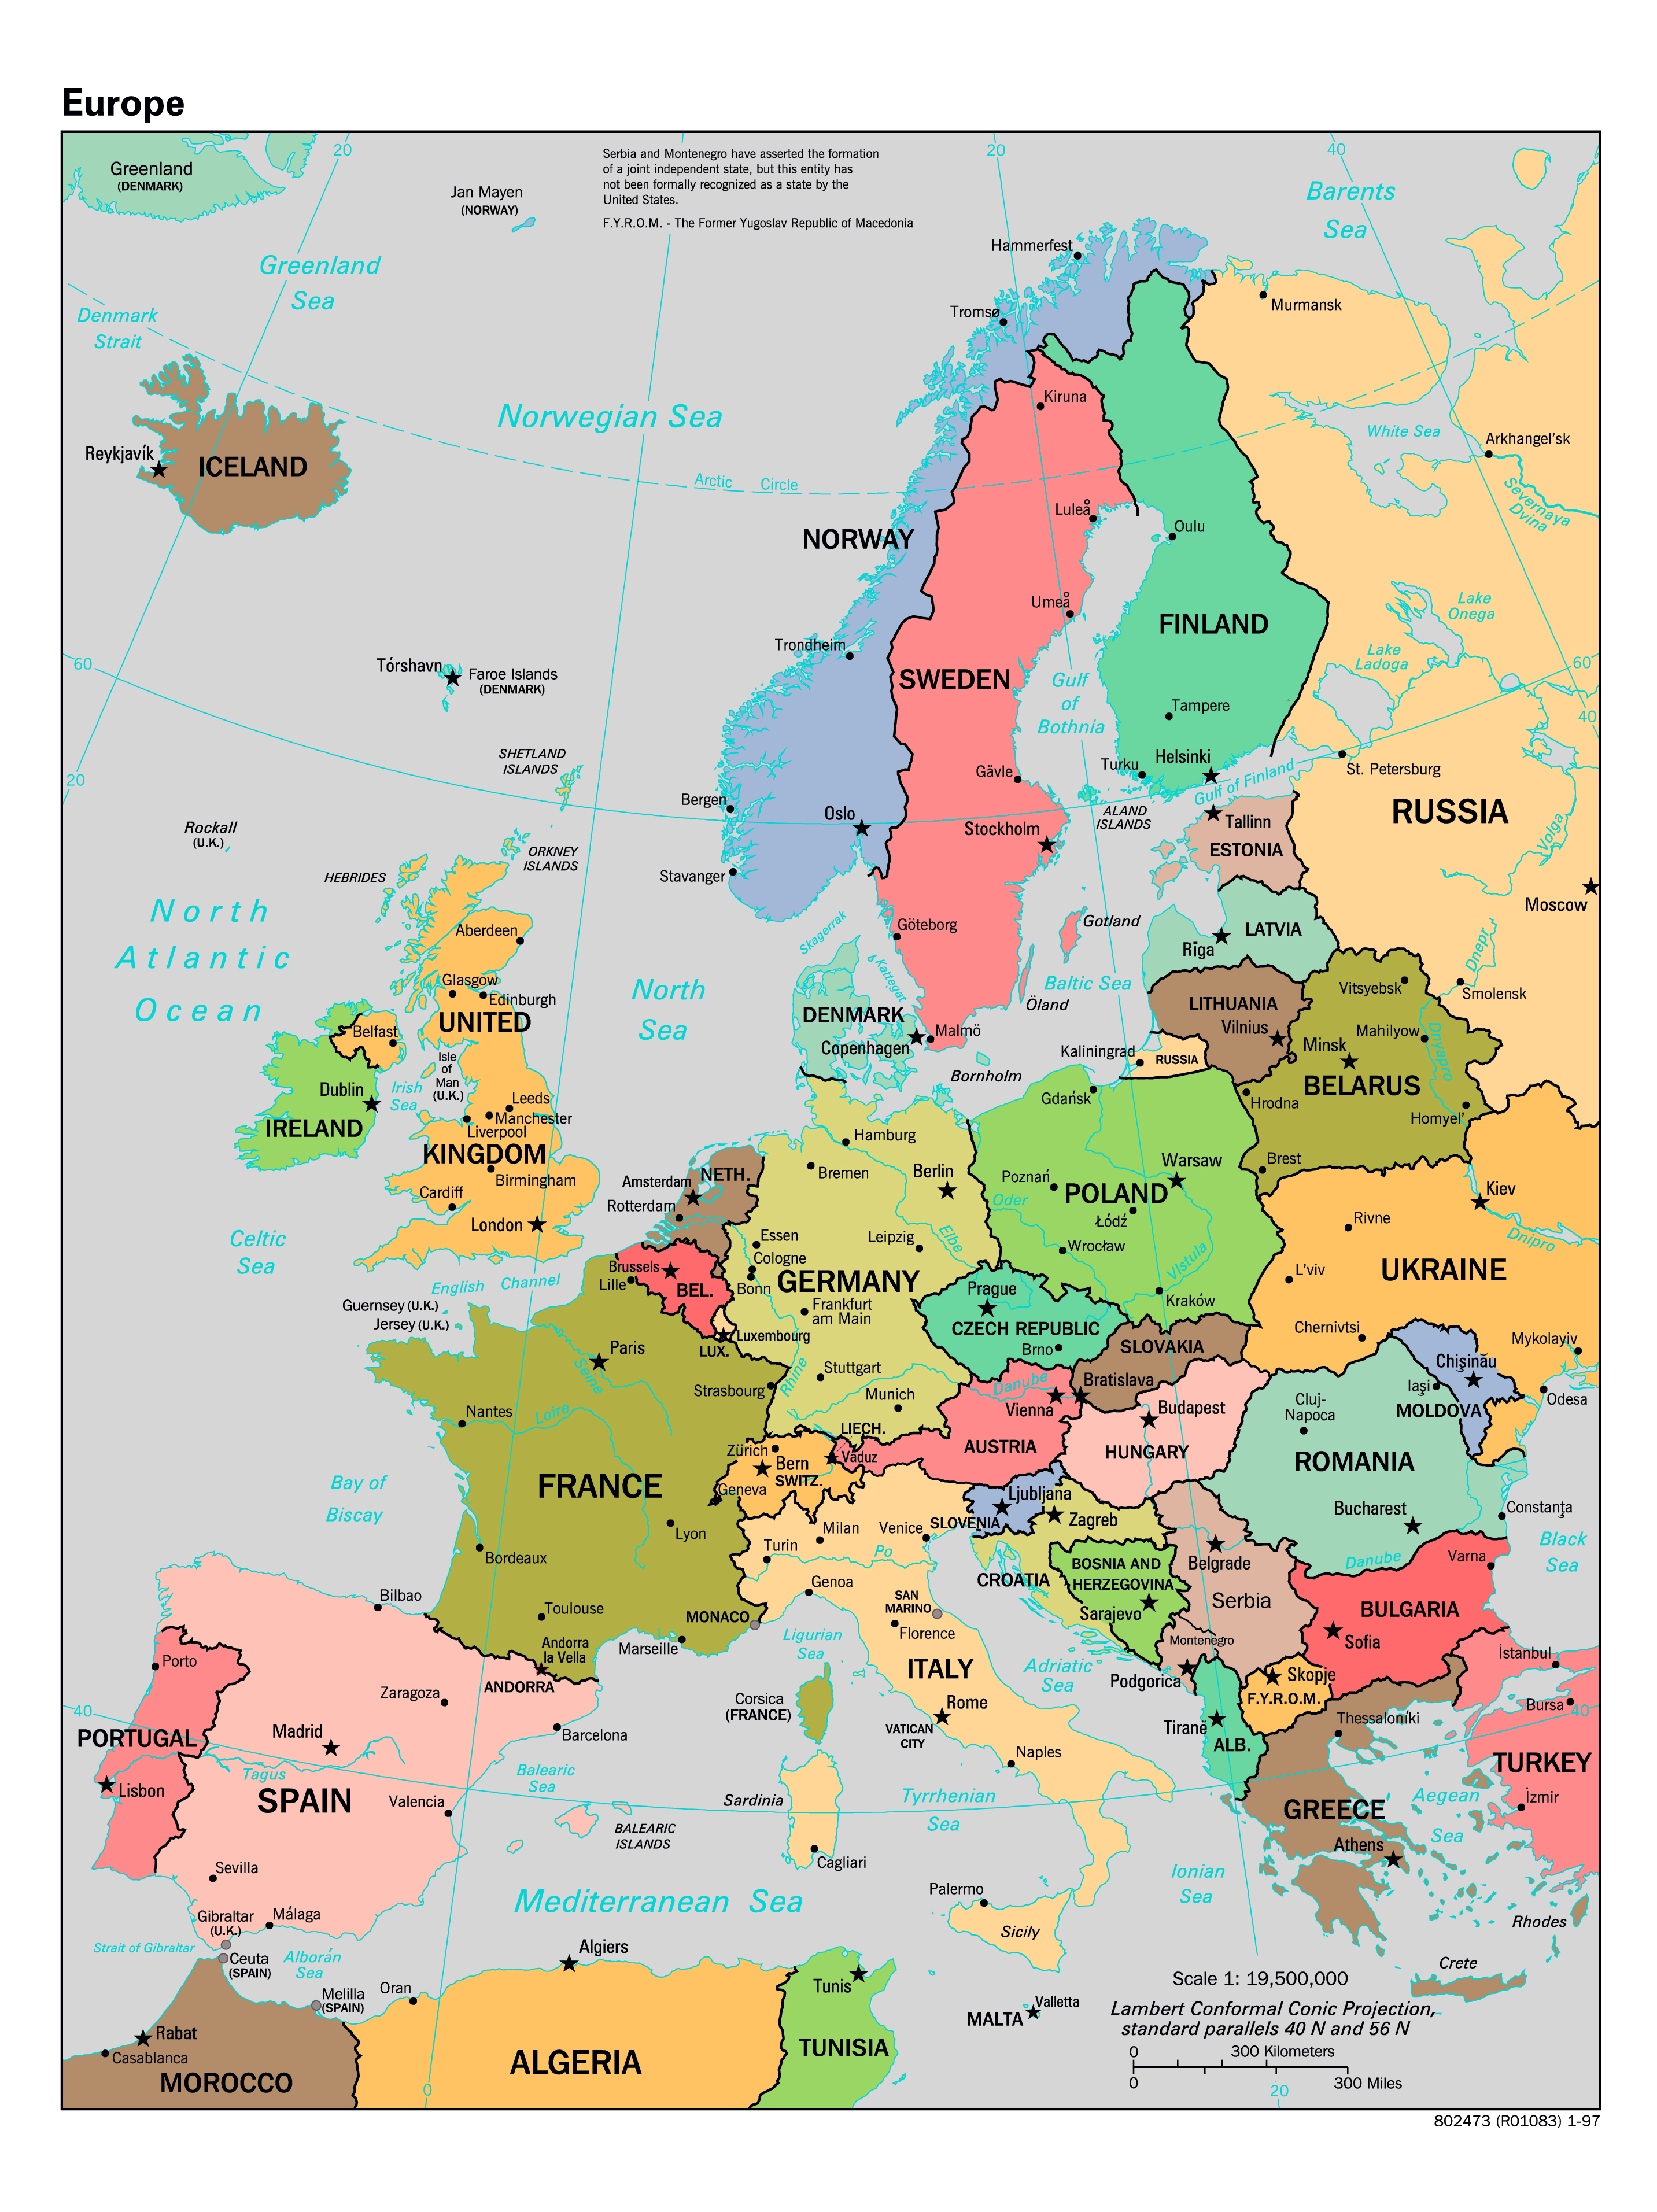 Large scale political map of Europe - 1997 | Europe | Mapsland | Maps ...